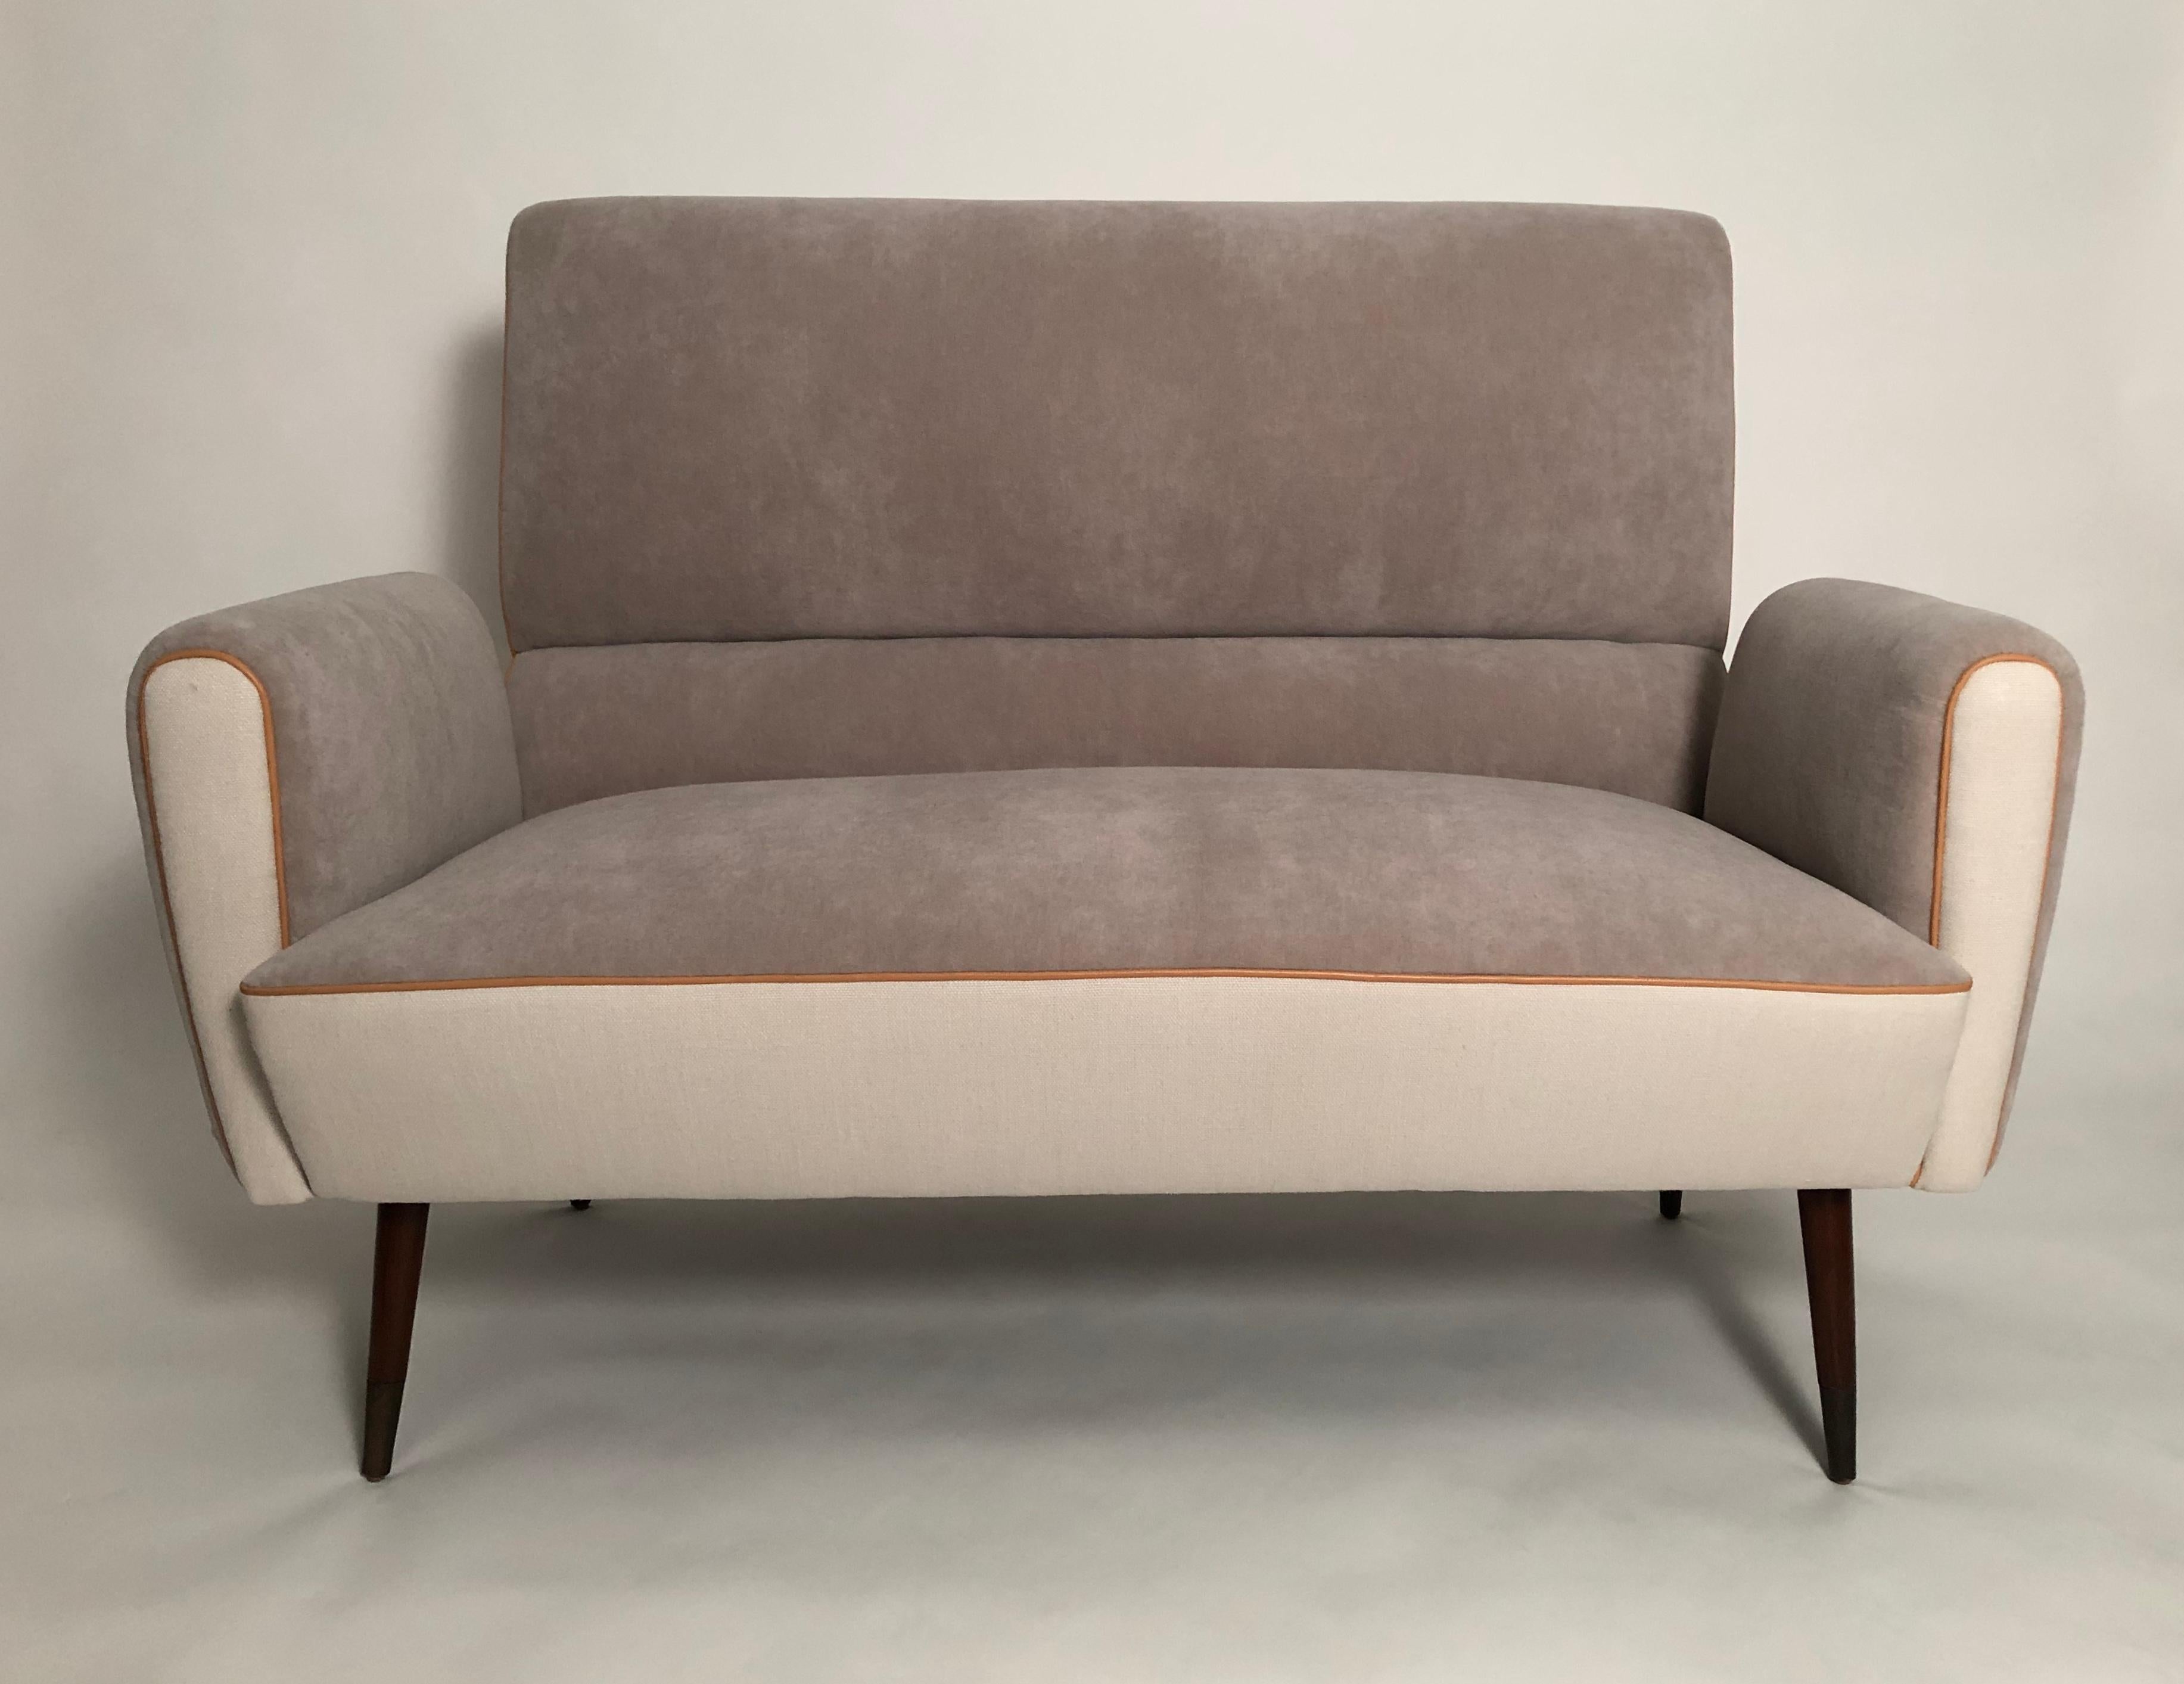 Mid-Century Modern Italian Upholstered Sofa in the Manner of Gio Ponti, circa 1950s